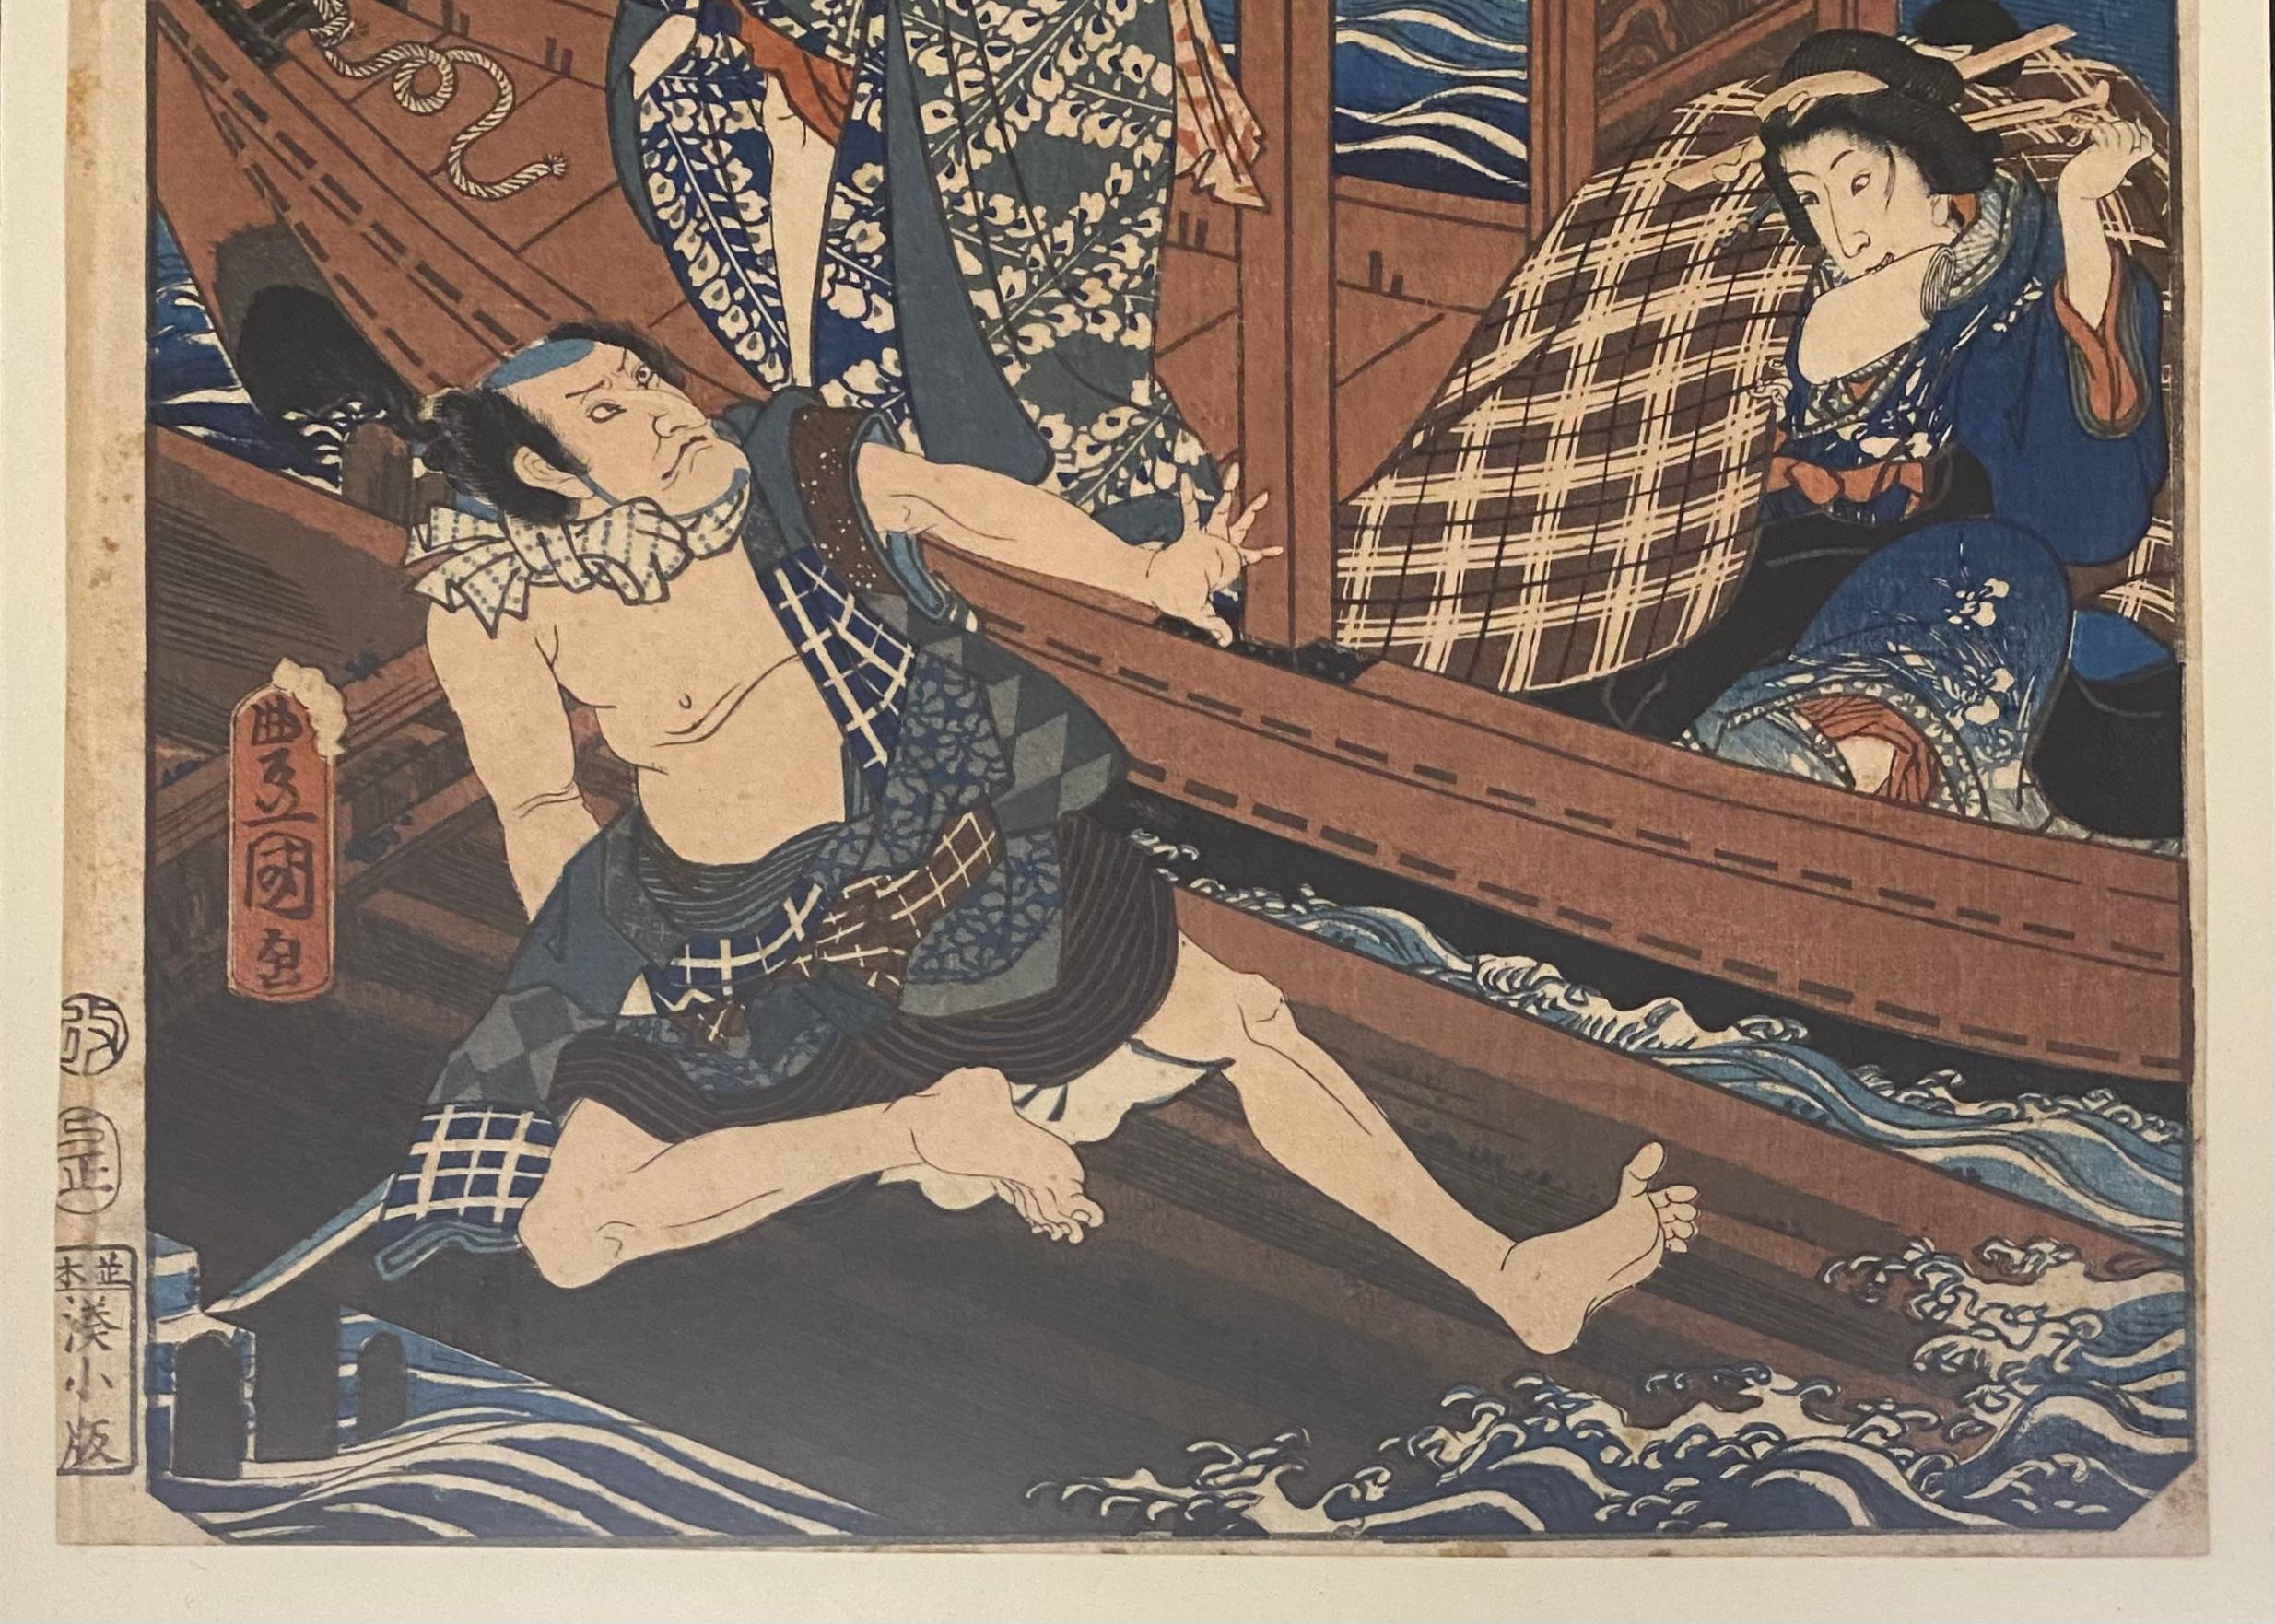 A fine, professionally framed original Japanese woodblock print attributed to the master Utagawa Kunisada (1786 – 1865), also known as Utagawa Toyokuni III; ink and color on paper.
Edo period, circa 1859.

This is original Utagawa Kunisada Original